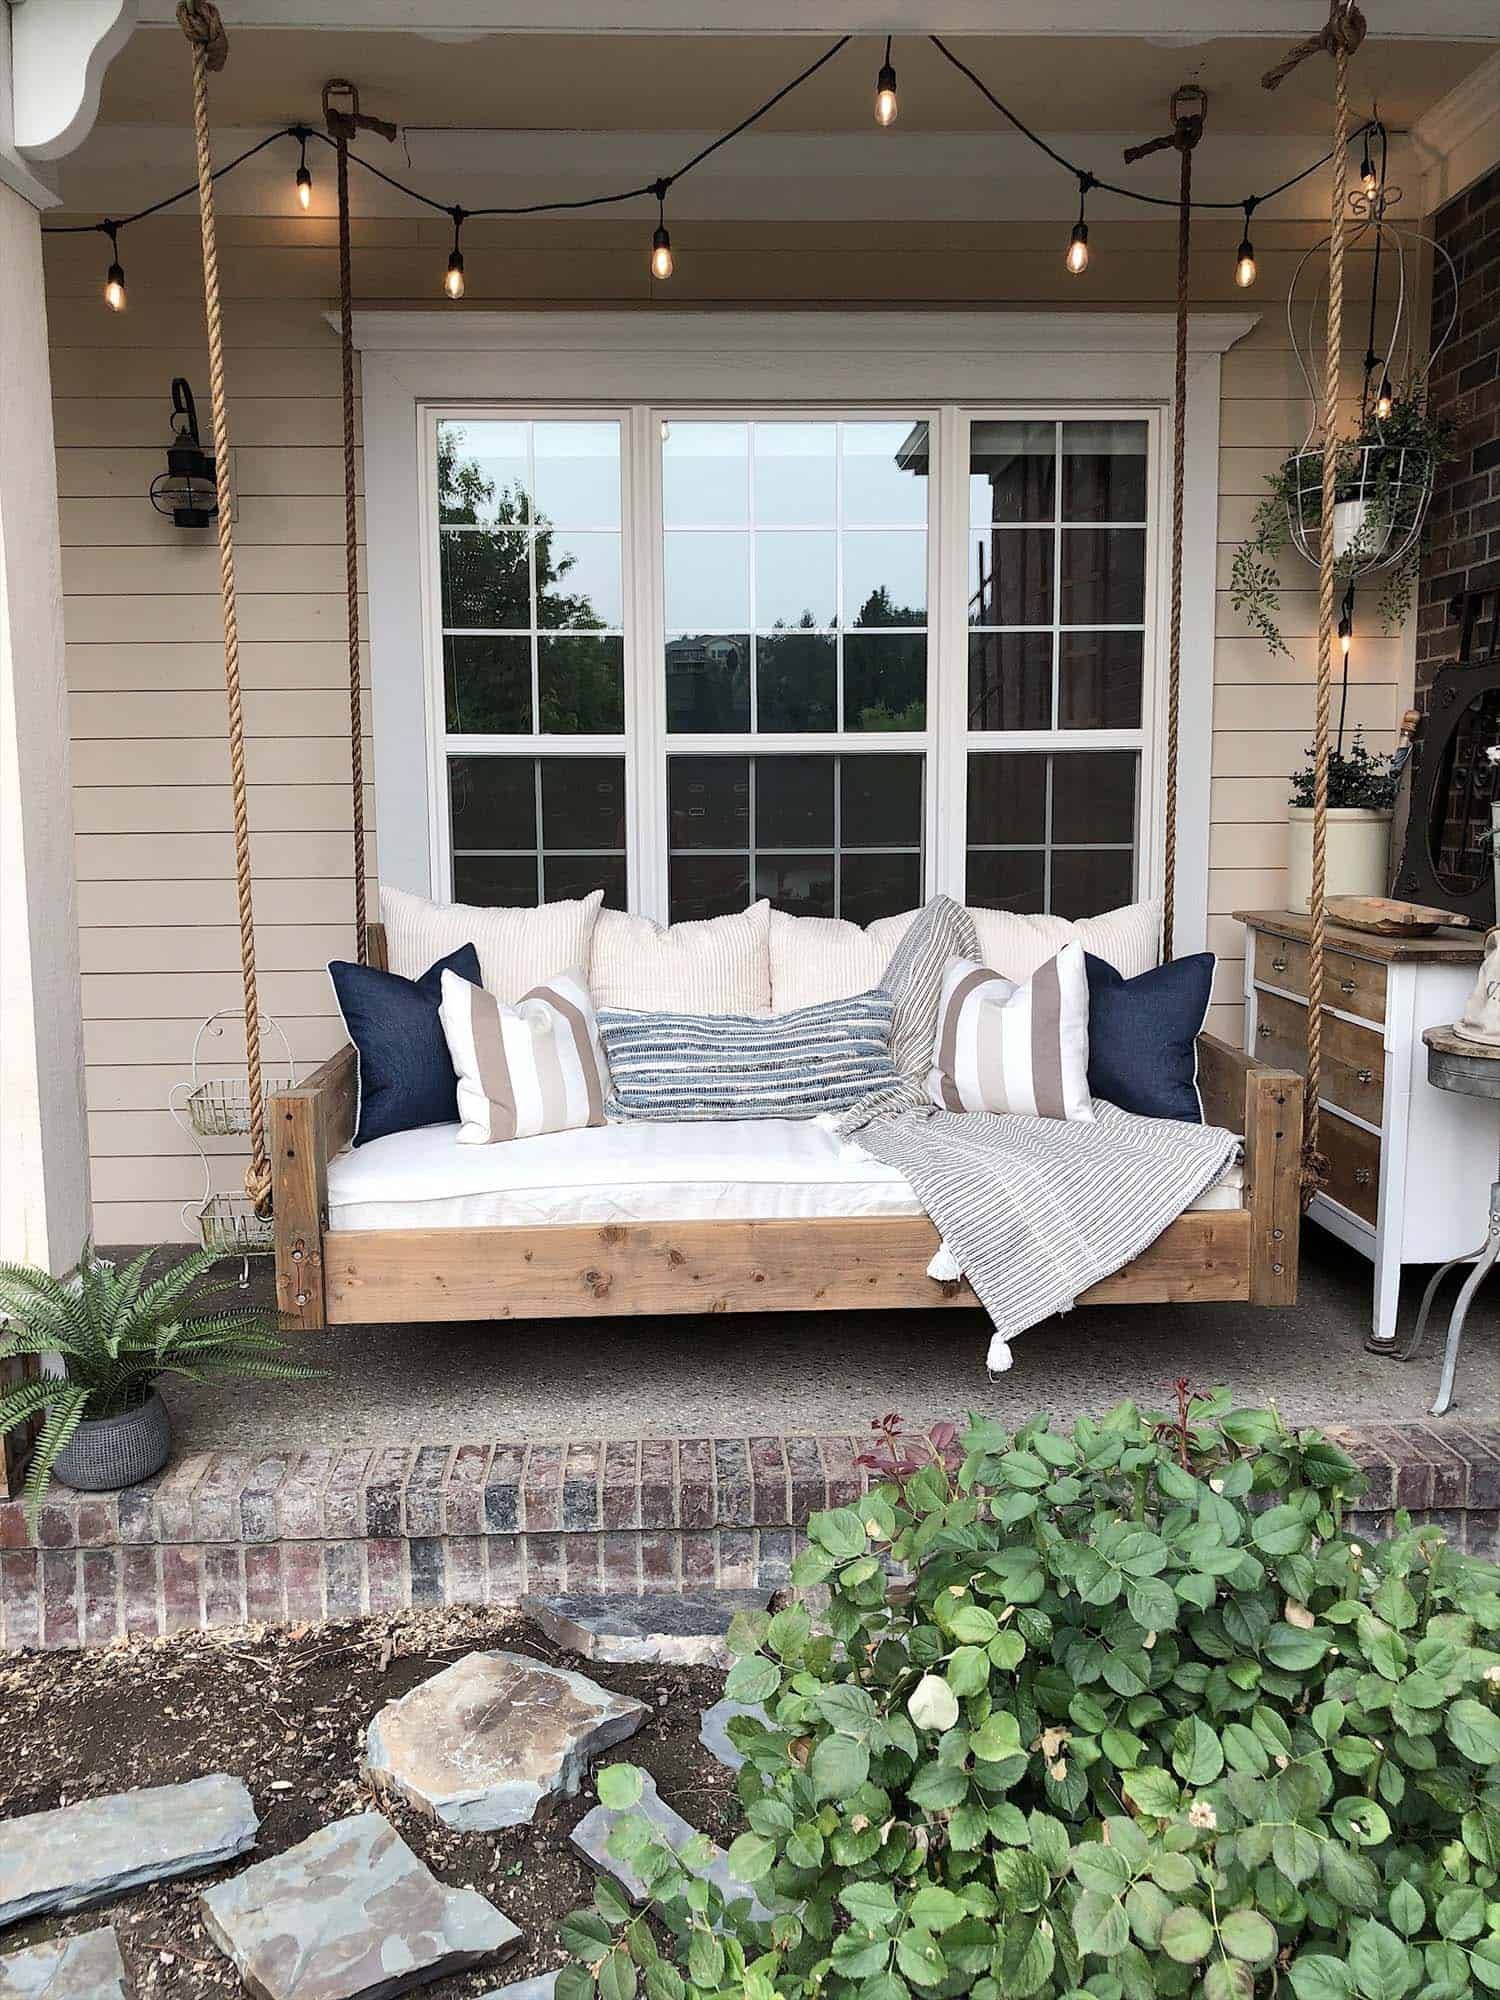 26 Incredibly Relaxing Swinging Bed Ideas For Your Porch